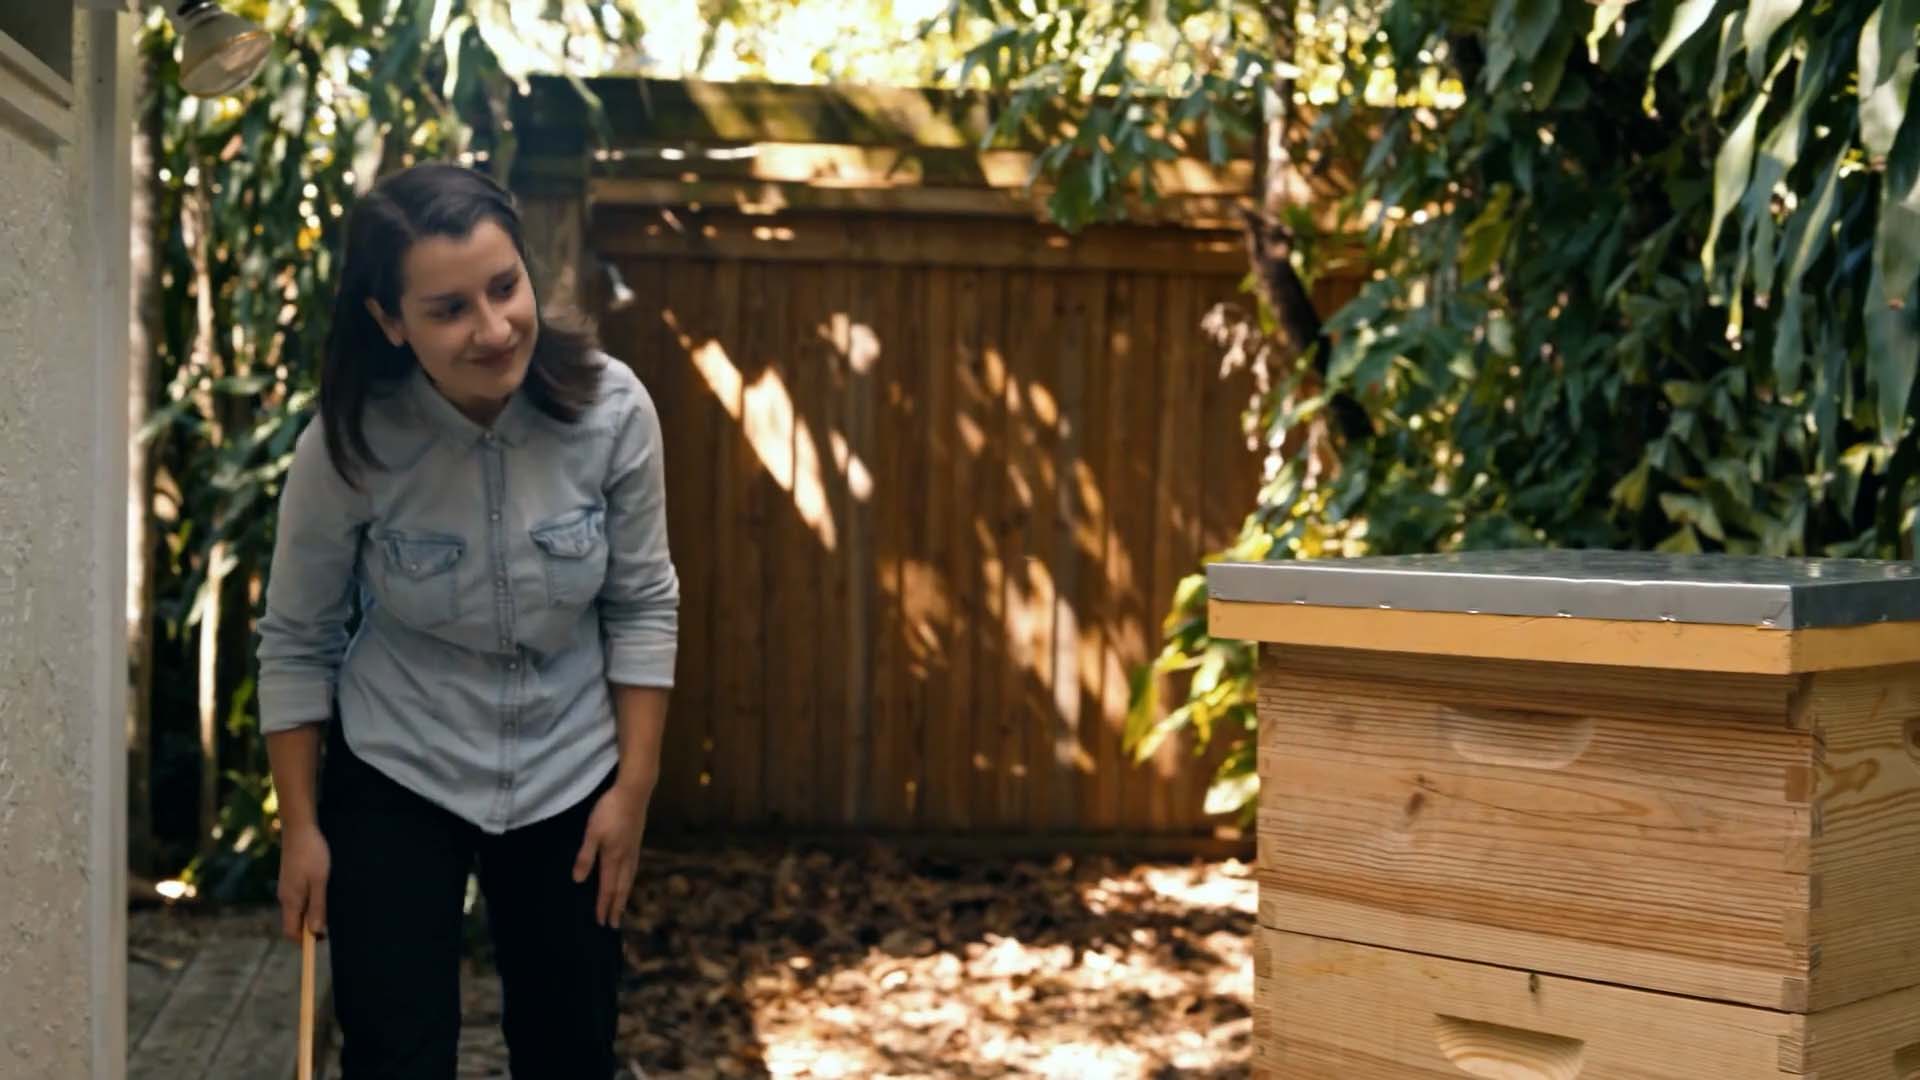 A beekeeper stands beside a beehive